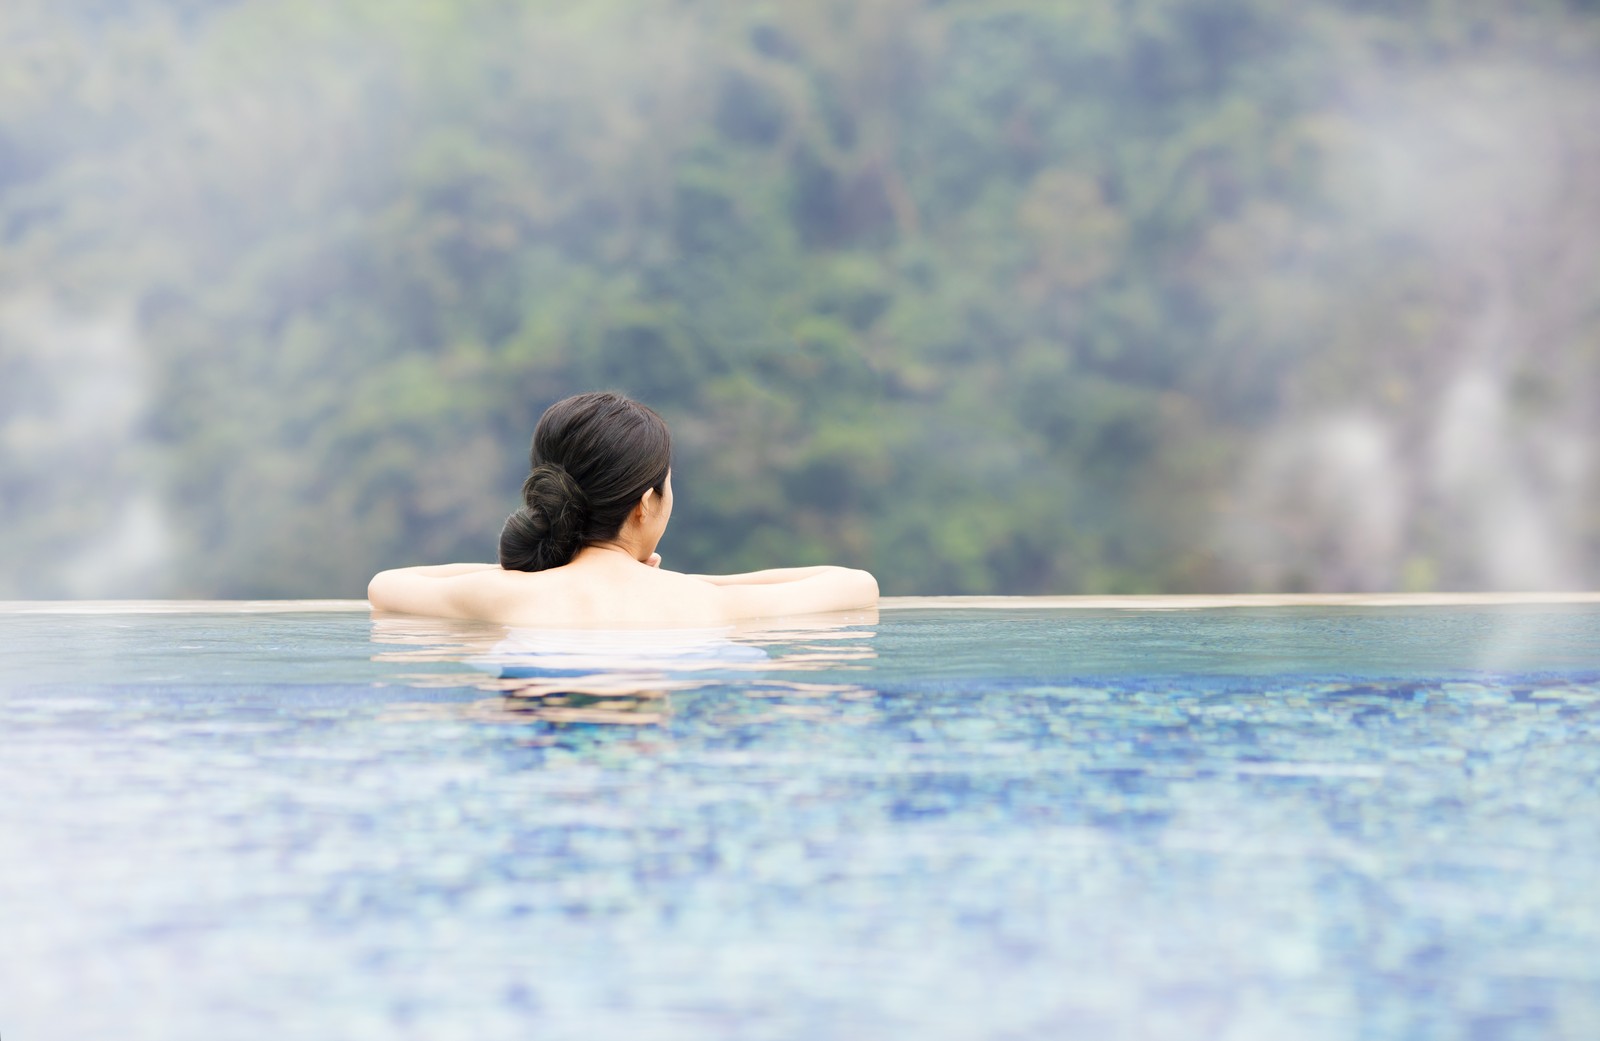 Asin Hot Spring Tour in Baguio | With Round-Trip Transfer